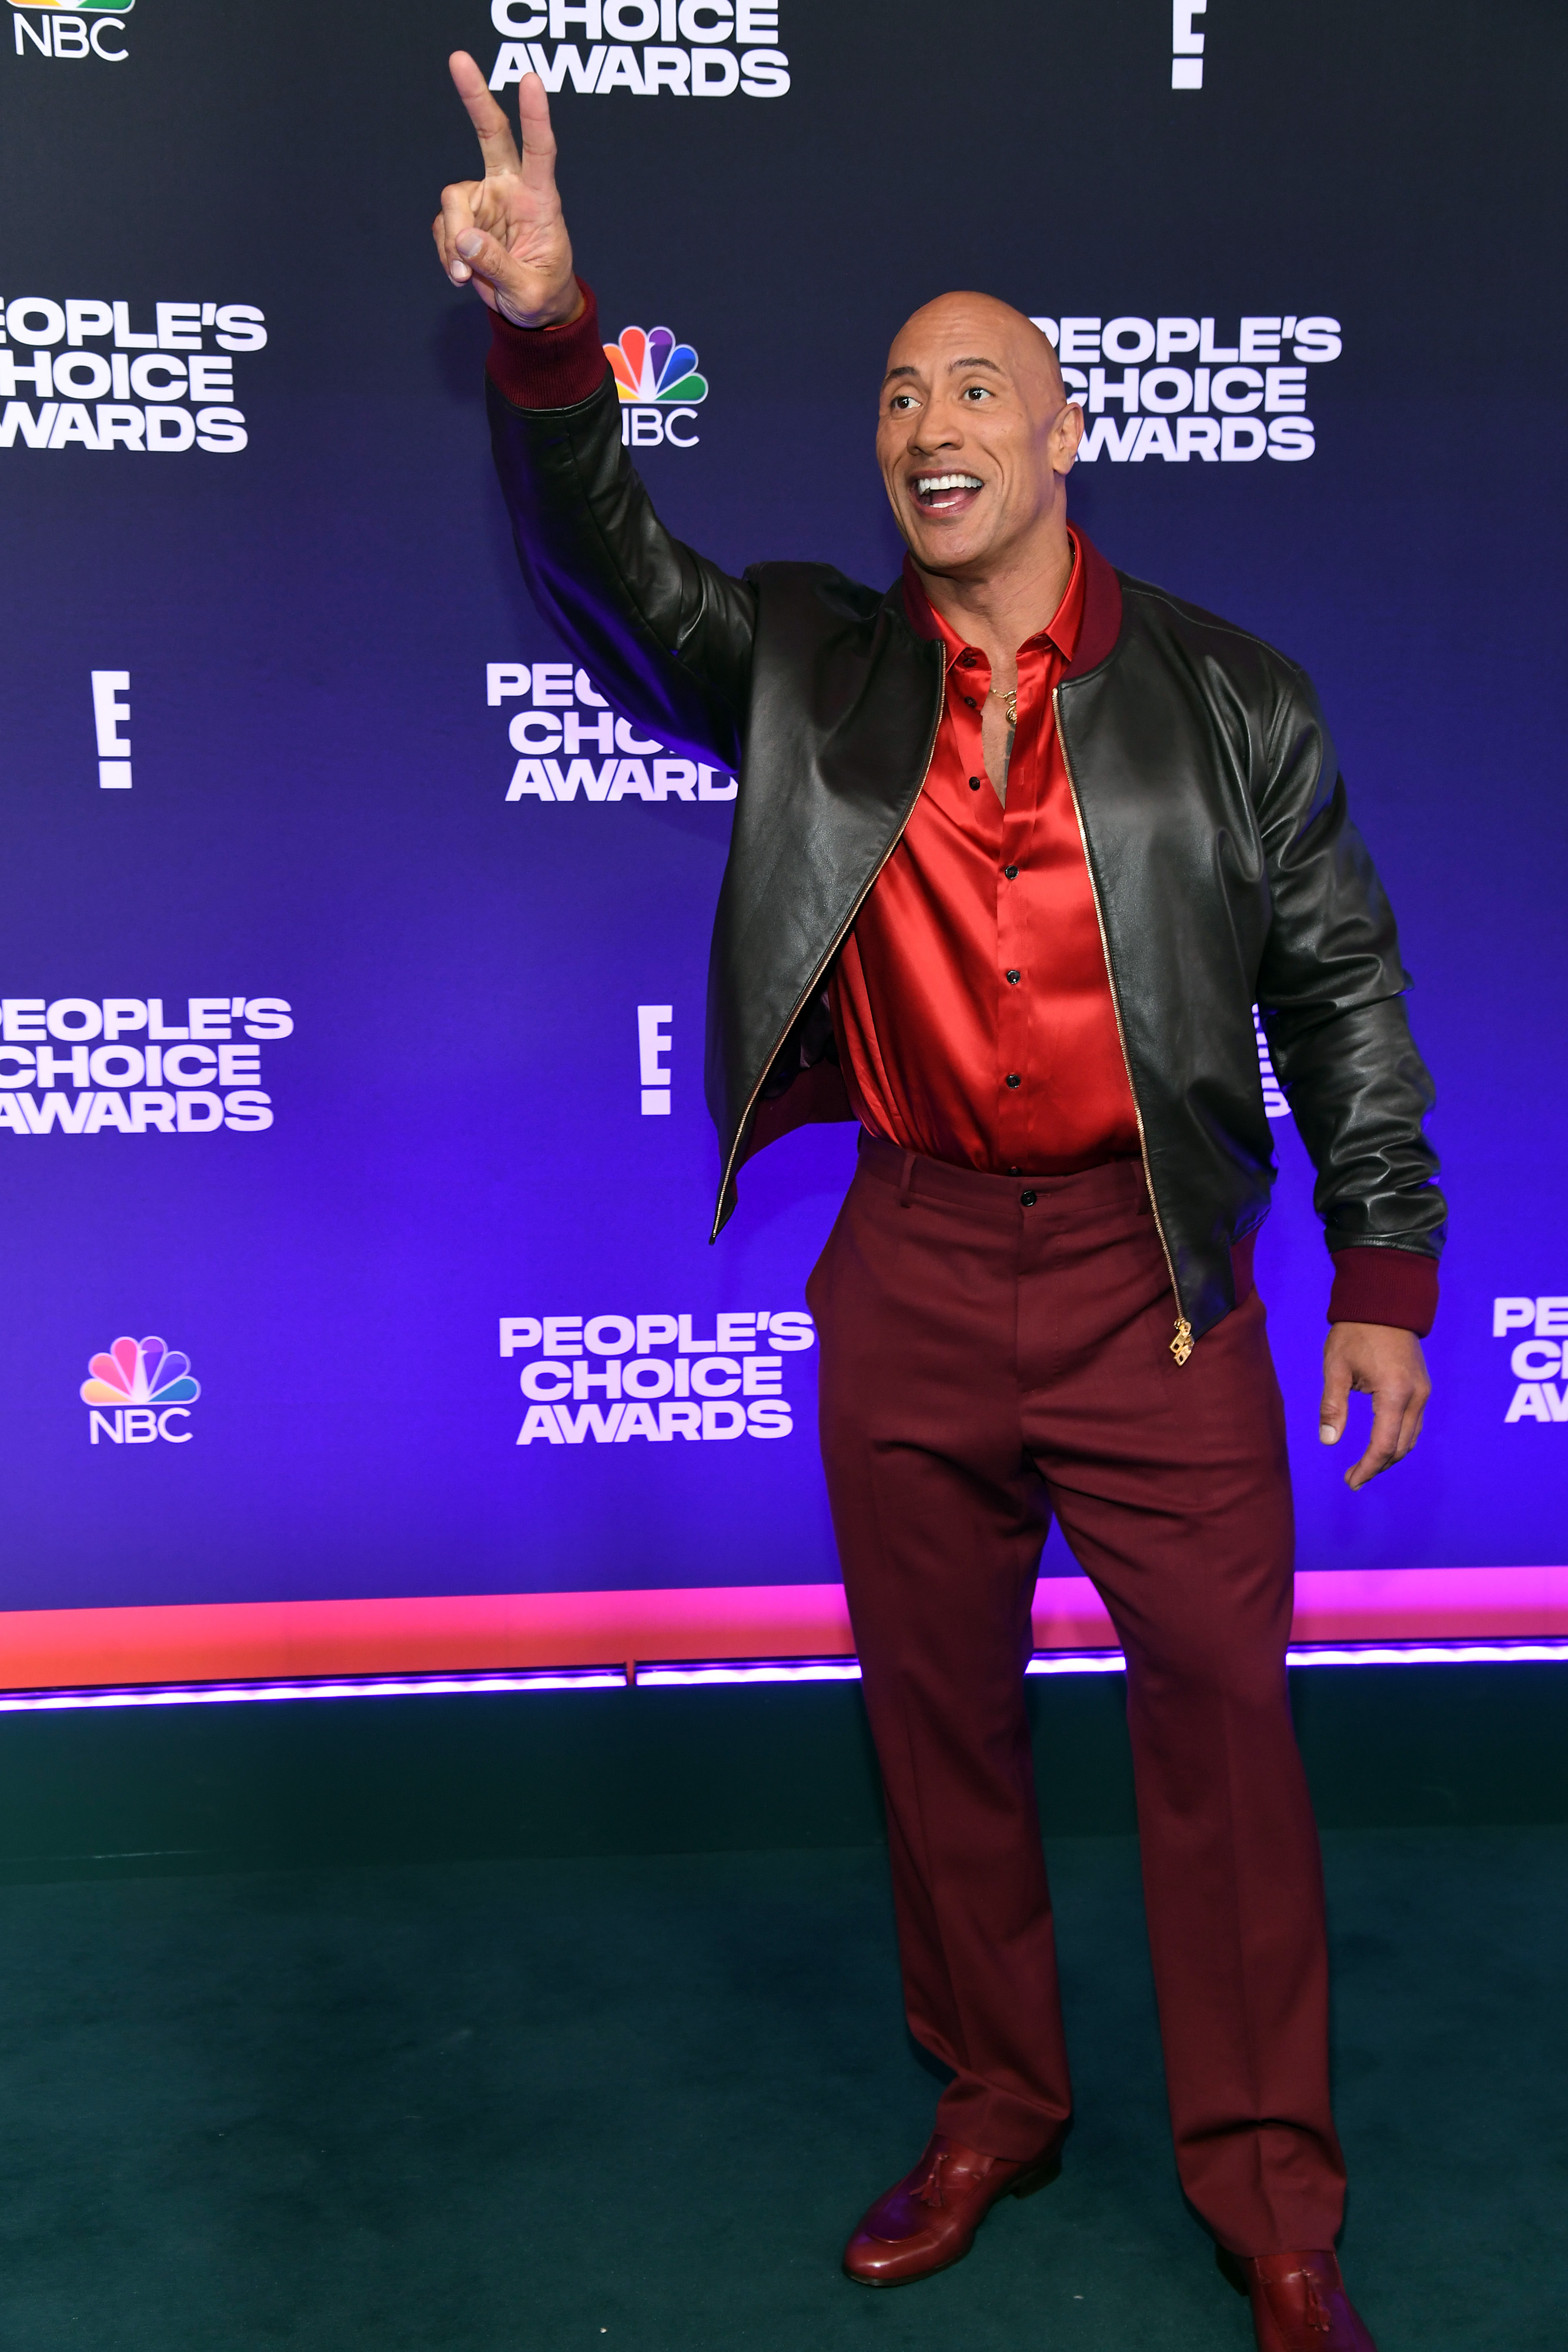 Dwayne Johnson Honored with People’s Champion Award at 2021 People’s Choice Awards